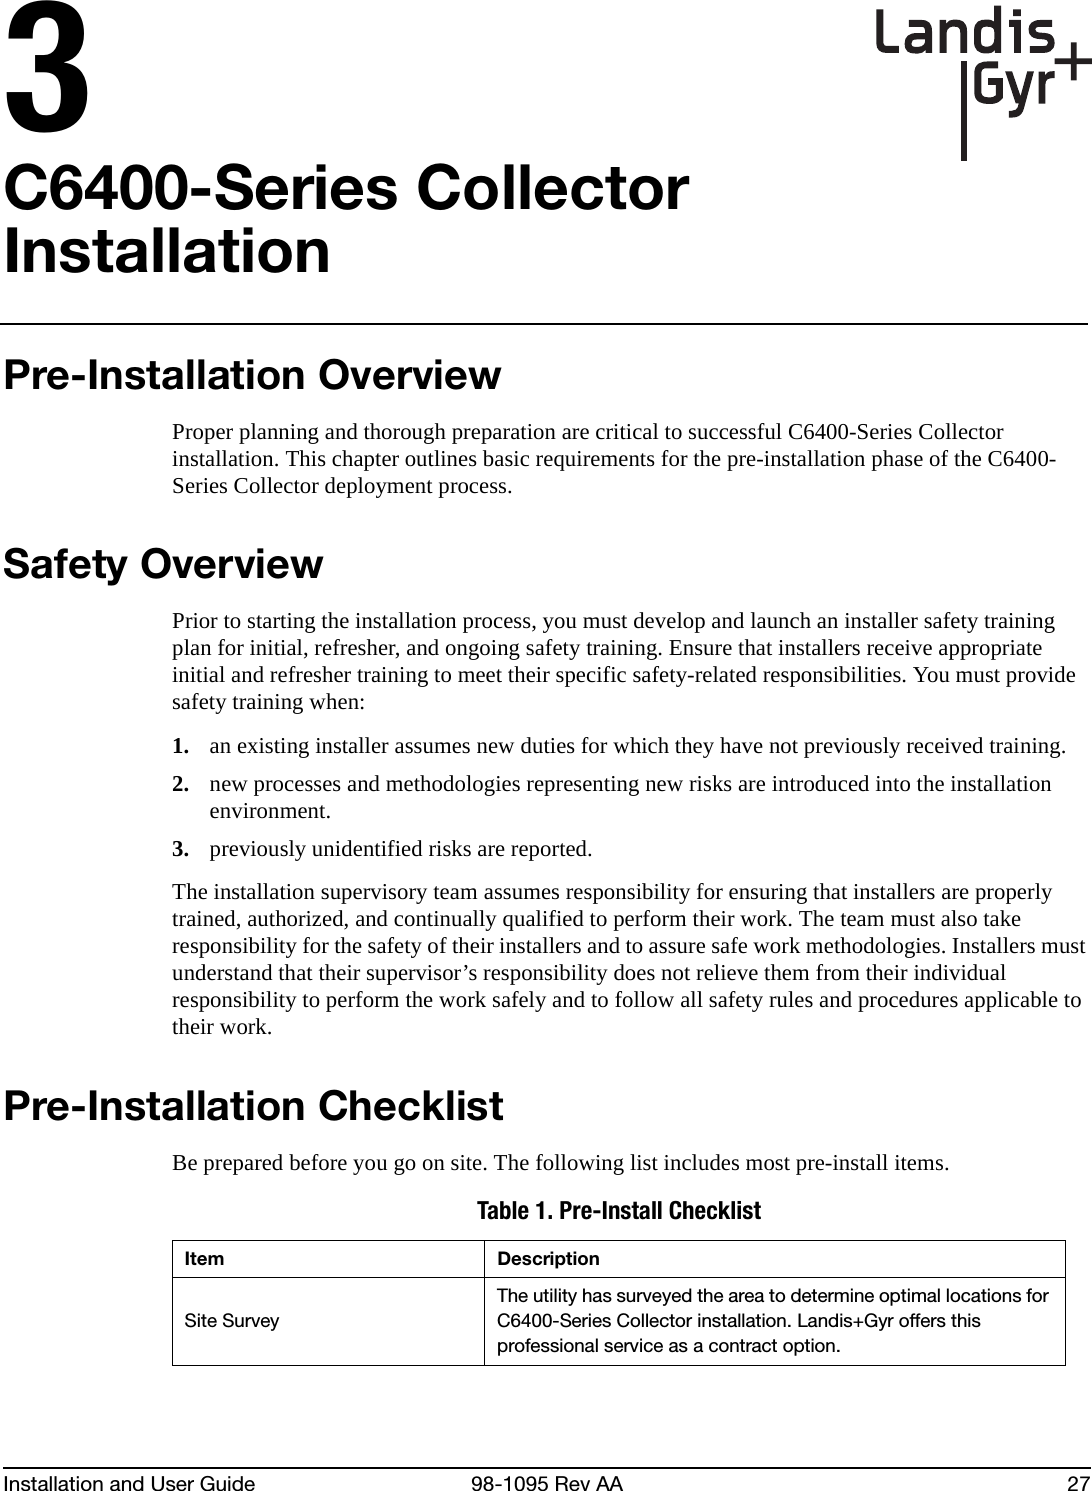 Installation and User Guide 98-1095 Rev AA 273C6400-Series Collector InstallationPre-Installation OverviewProper planning and thorough preparation are critical to successful C6400-Series Collector installation. This chapter outlines basic requirements for the pre-installation phase of the C6400-Series Collector deployment process.Safety OverviewPrior to starting the installation process, you must develop and launch an installer safety training plan for initial, refresher, and ongoing safety training. Ensure that installers receive appropriate initial and refresher training to meet their specific safety-related responsibilities. You must provide safety training when:1. an existing installer assumes new duties for which they have not previously received training.2. new processes and methodologies representing new risks are introduced into the installation environment.3. previously unidentified risks are reported.The installation supervisory team assumes responsibility for ensuring that installers are properly trained, authorized, and continually qualified to perform their work. The team must also take responsibility for the safety of their installers and to assure safe work methodologies. Installers must understand that their supervisor’s responsibility does not relieve them from their individual responsibility to perform the work safely and to follow all safety rules and procedures applicable to their work.Pre-Installation ChecklistBe prepared before you go on site. The following list includes most pre-install items.Table 1. Pre-Install ChecklistItem DescriptionSite SurveyThe utility has surveyed the area to determine optimal locations for C6400-Series Collector installation. Landis+Gyr offers this professional service as a contract option.